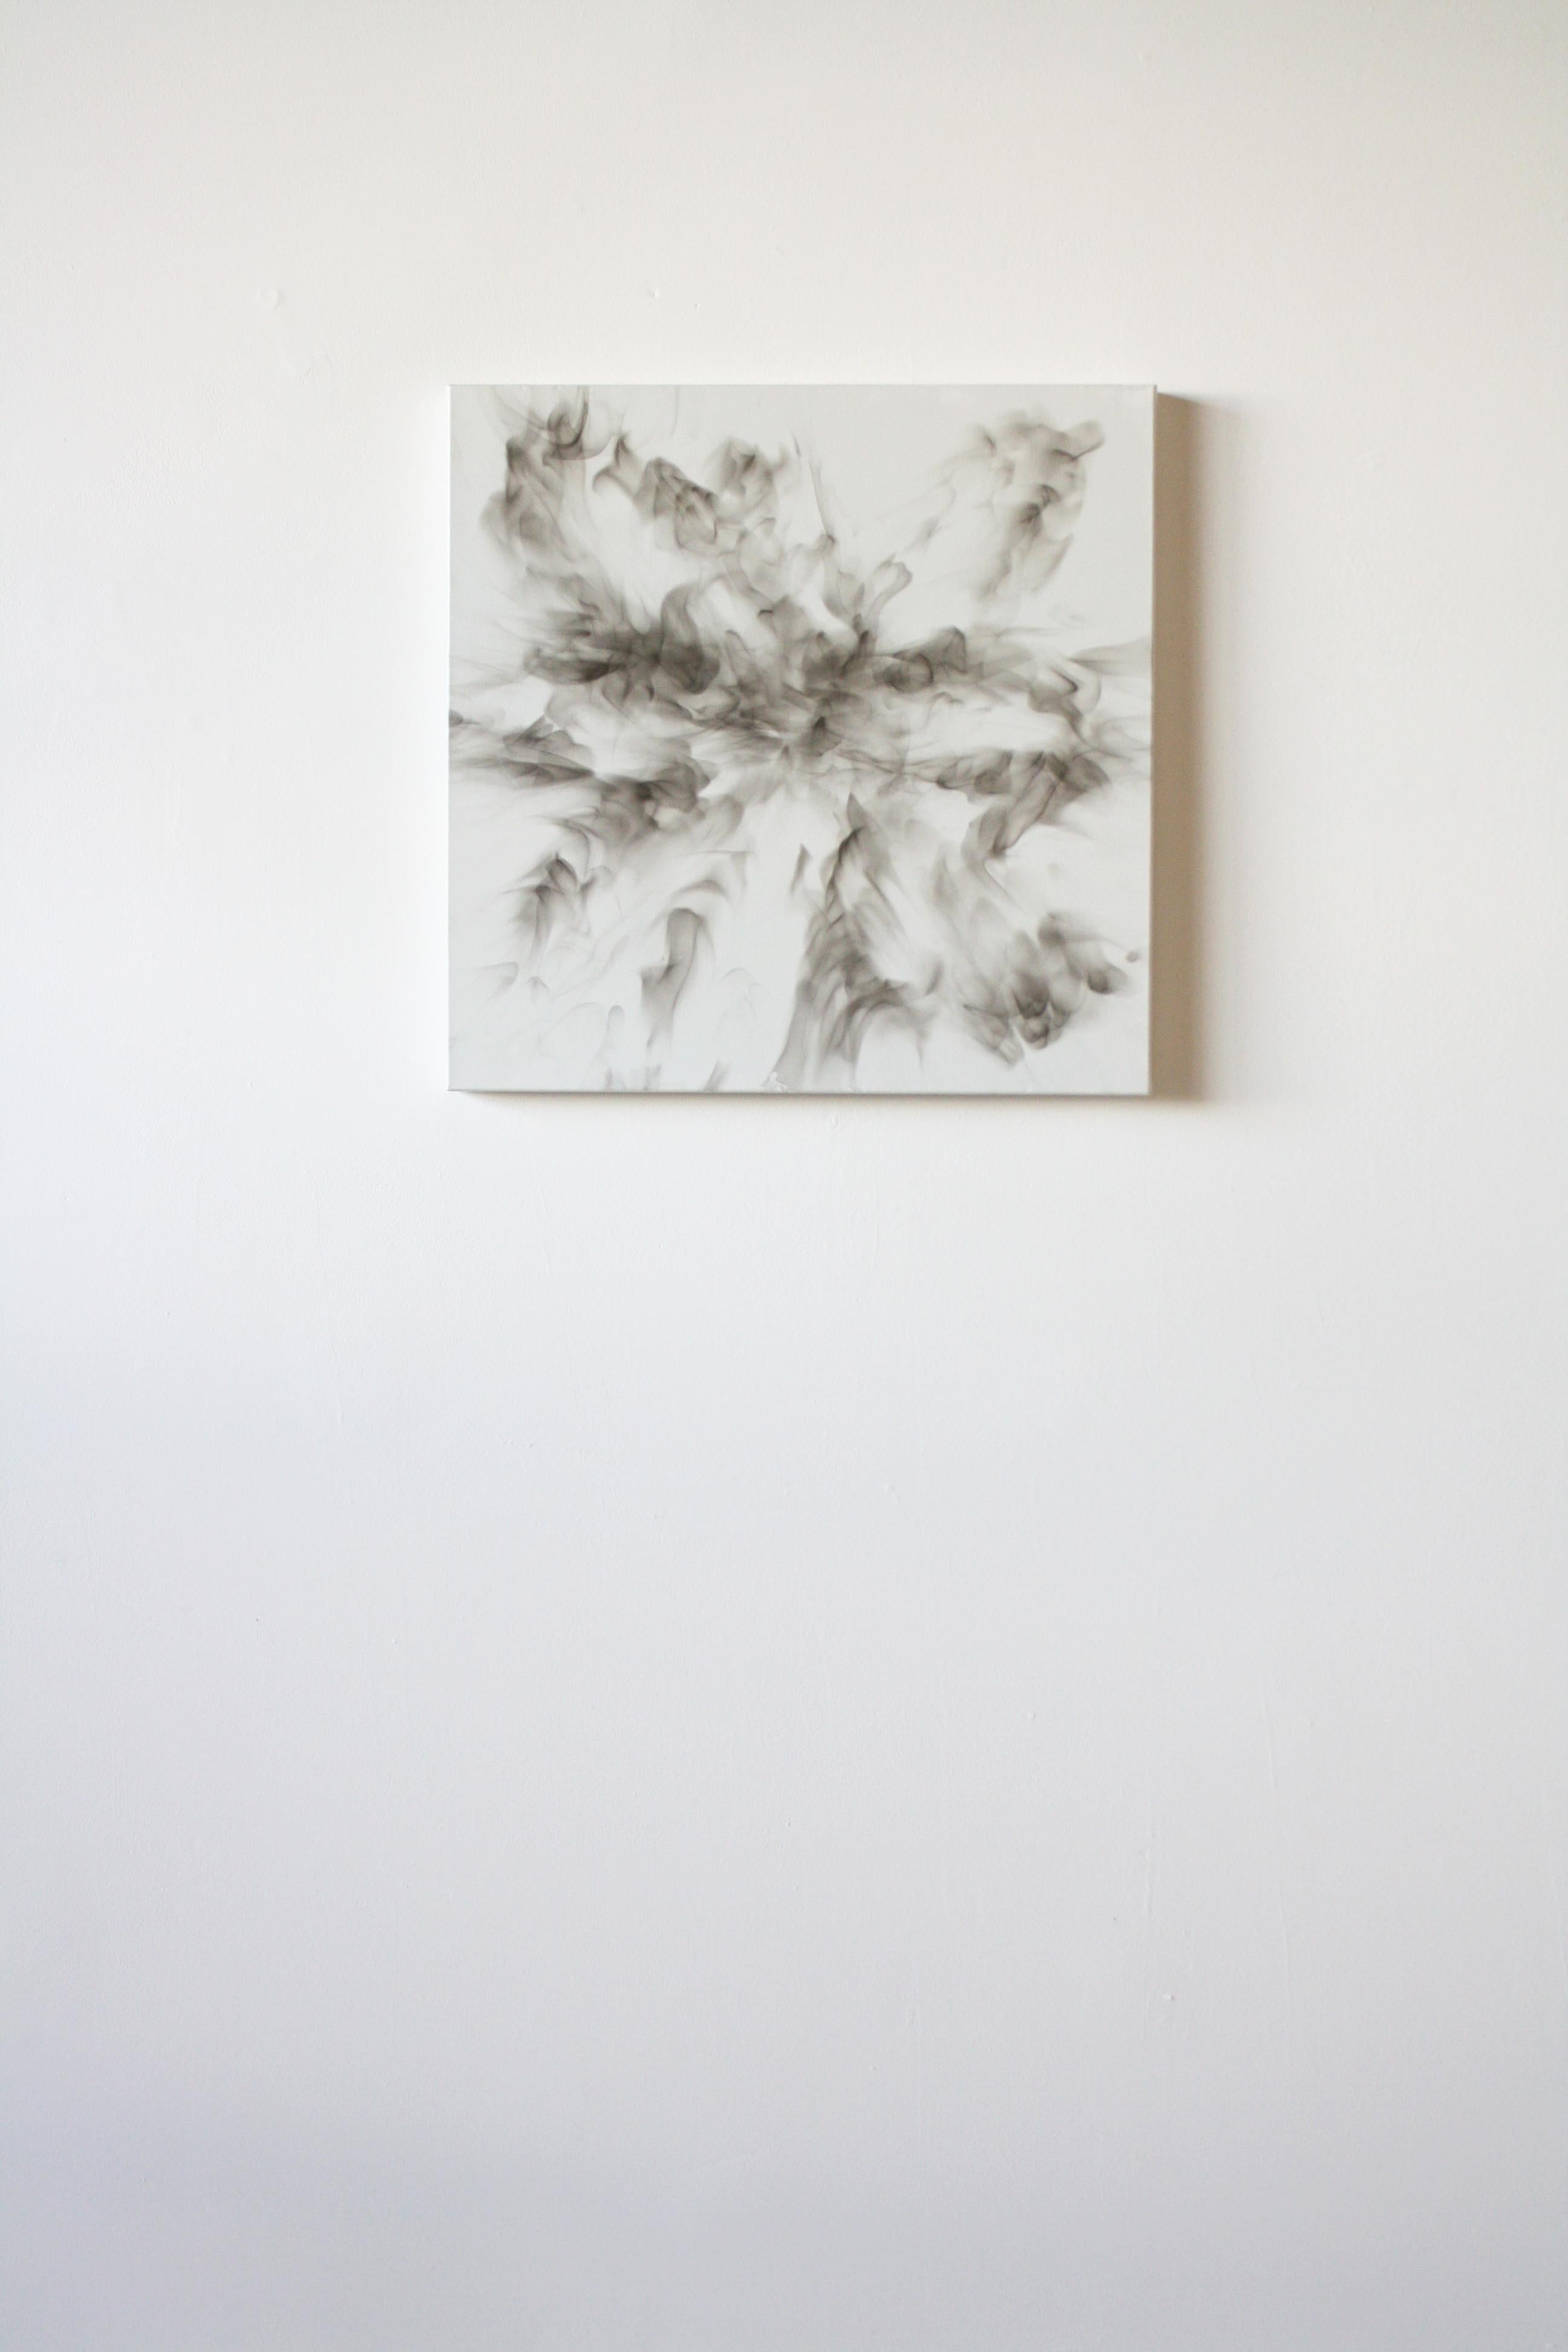 White and grey painting made from smoke from flames.
Flower Of Life II, 2017, Smoke and enamel on canvas, 24 × 24 in, 61 × 61 cm

Bio: Walters earned her B.F.A. from Savannah College of Art and Design 2016. In 2012 she attended the Cloud Club